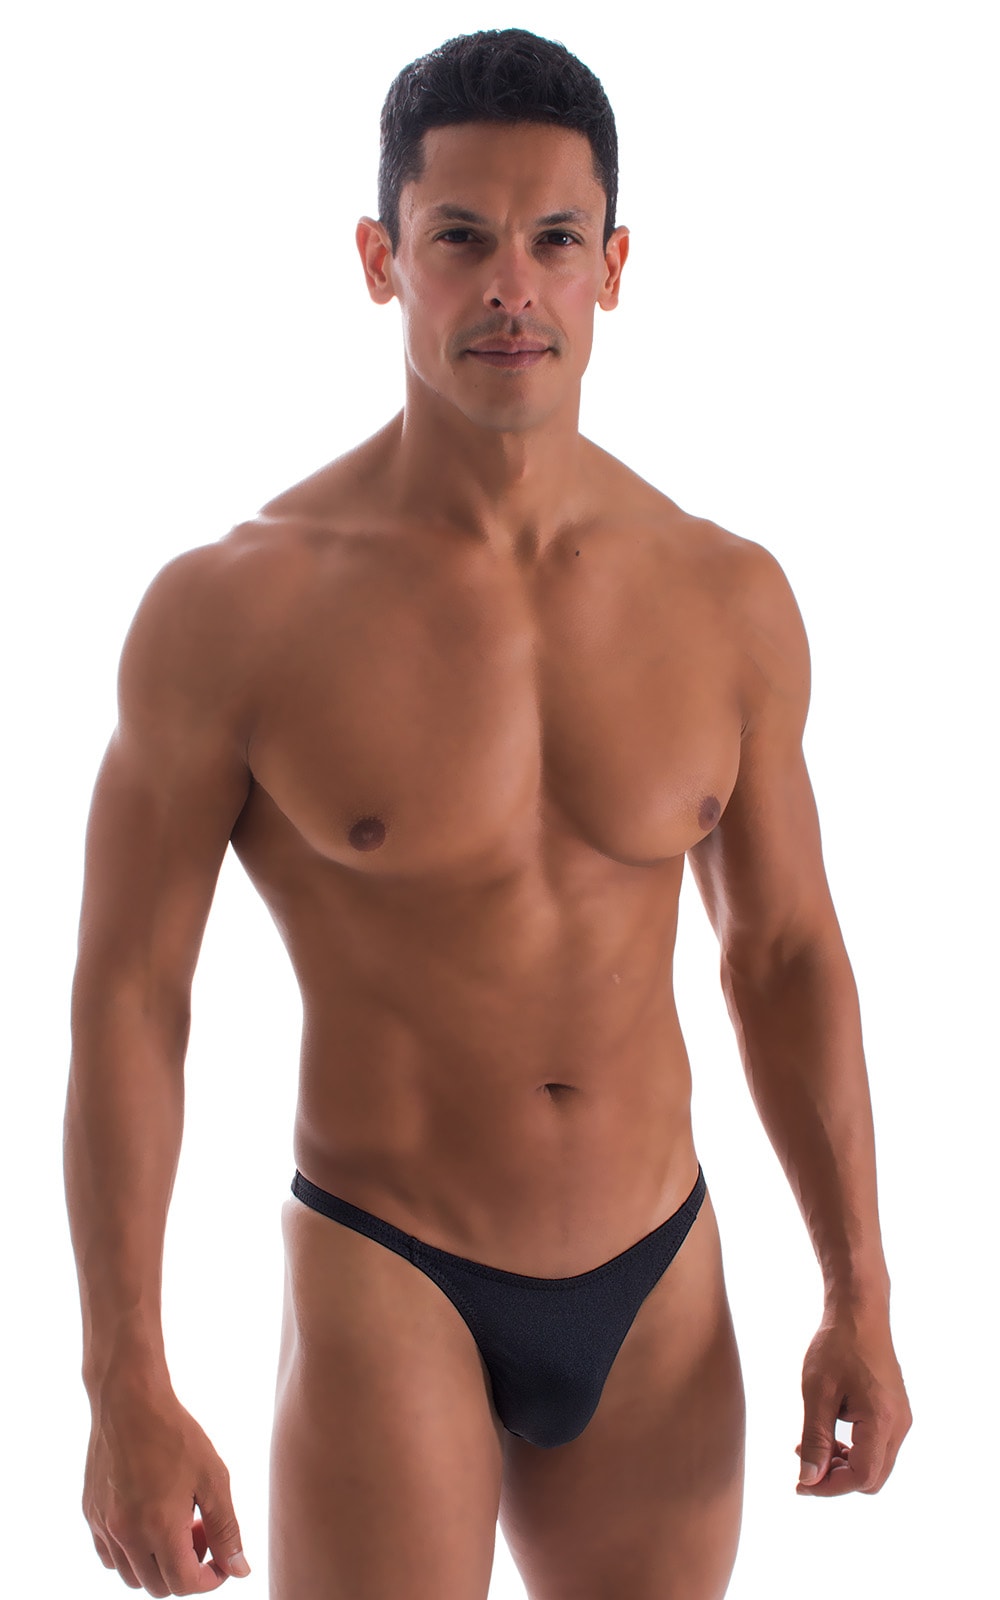 Bodybuilder Posing Suit - Narrow Back in Black tricot-nylon-lycra, Front View